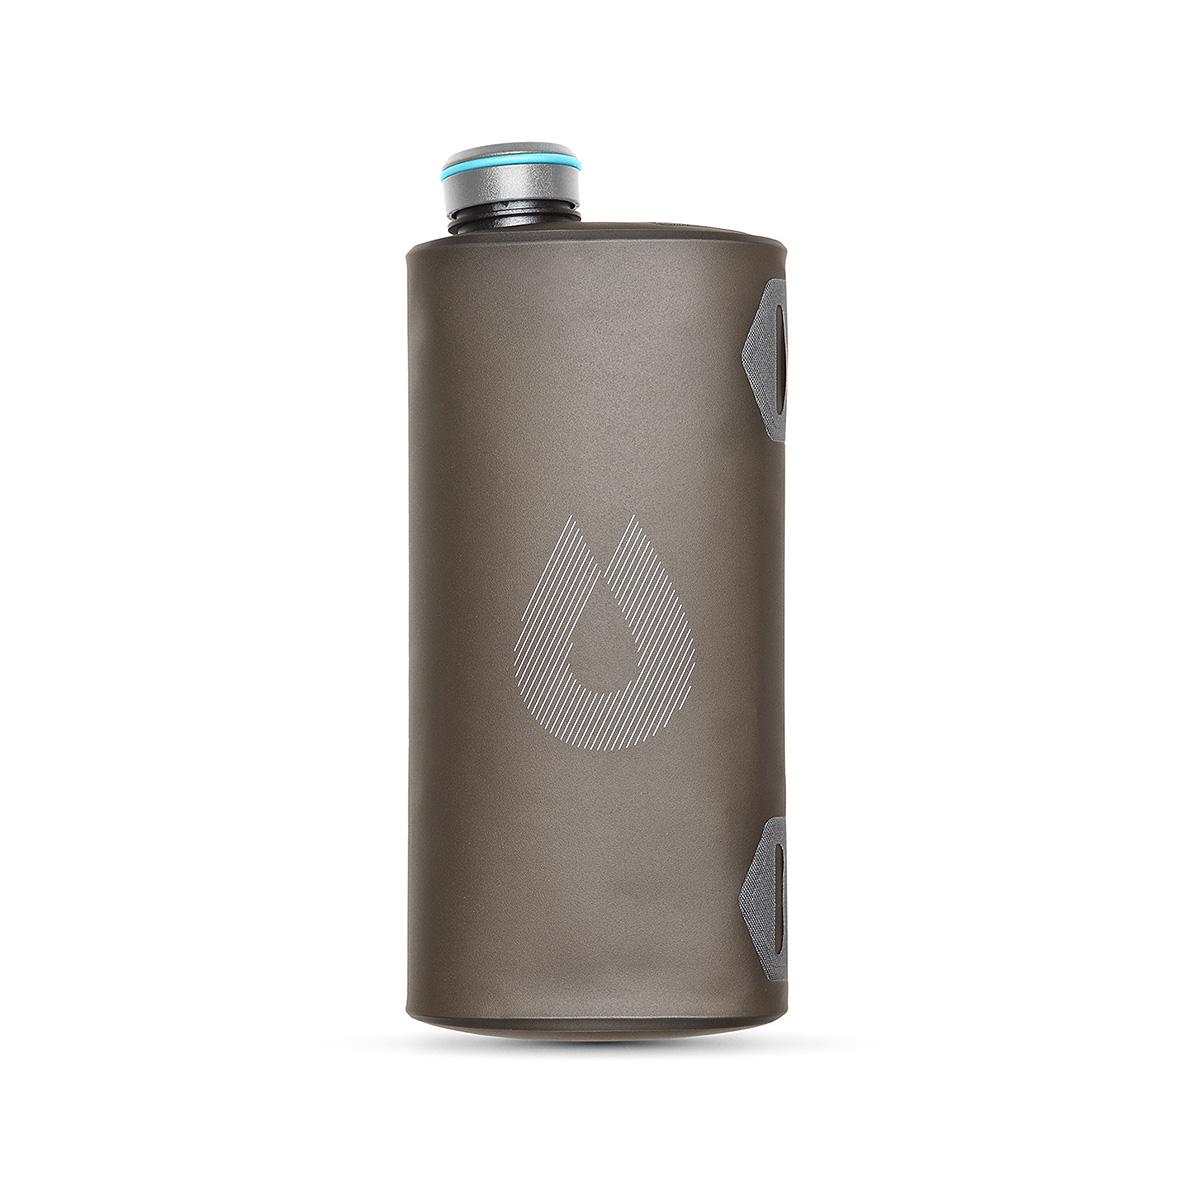  Seeker Collapsible Water Container - 2 Liter